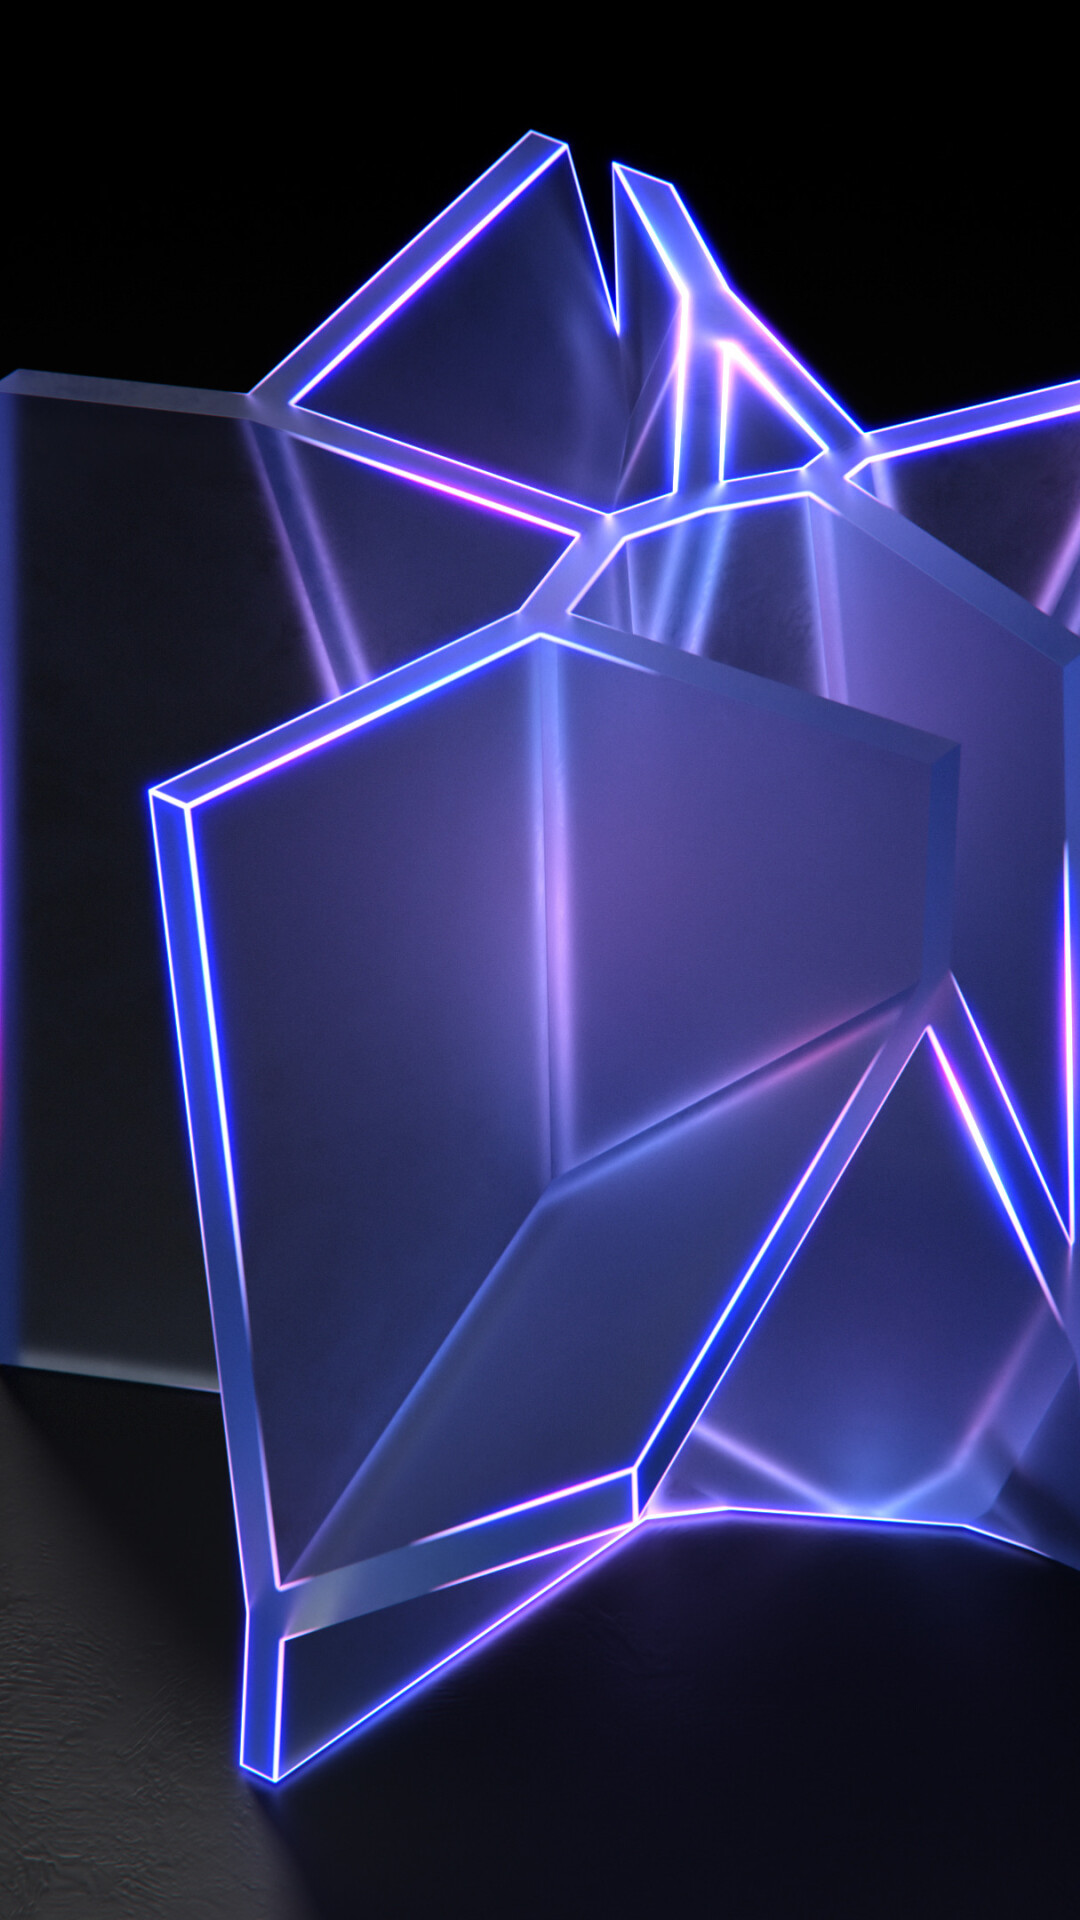 Geometric Abstract: Three-dimensional space, Complementary angles, Prism. 1080x1920 Full HD Wallpaper.